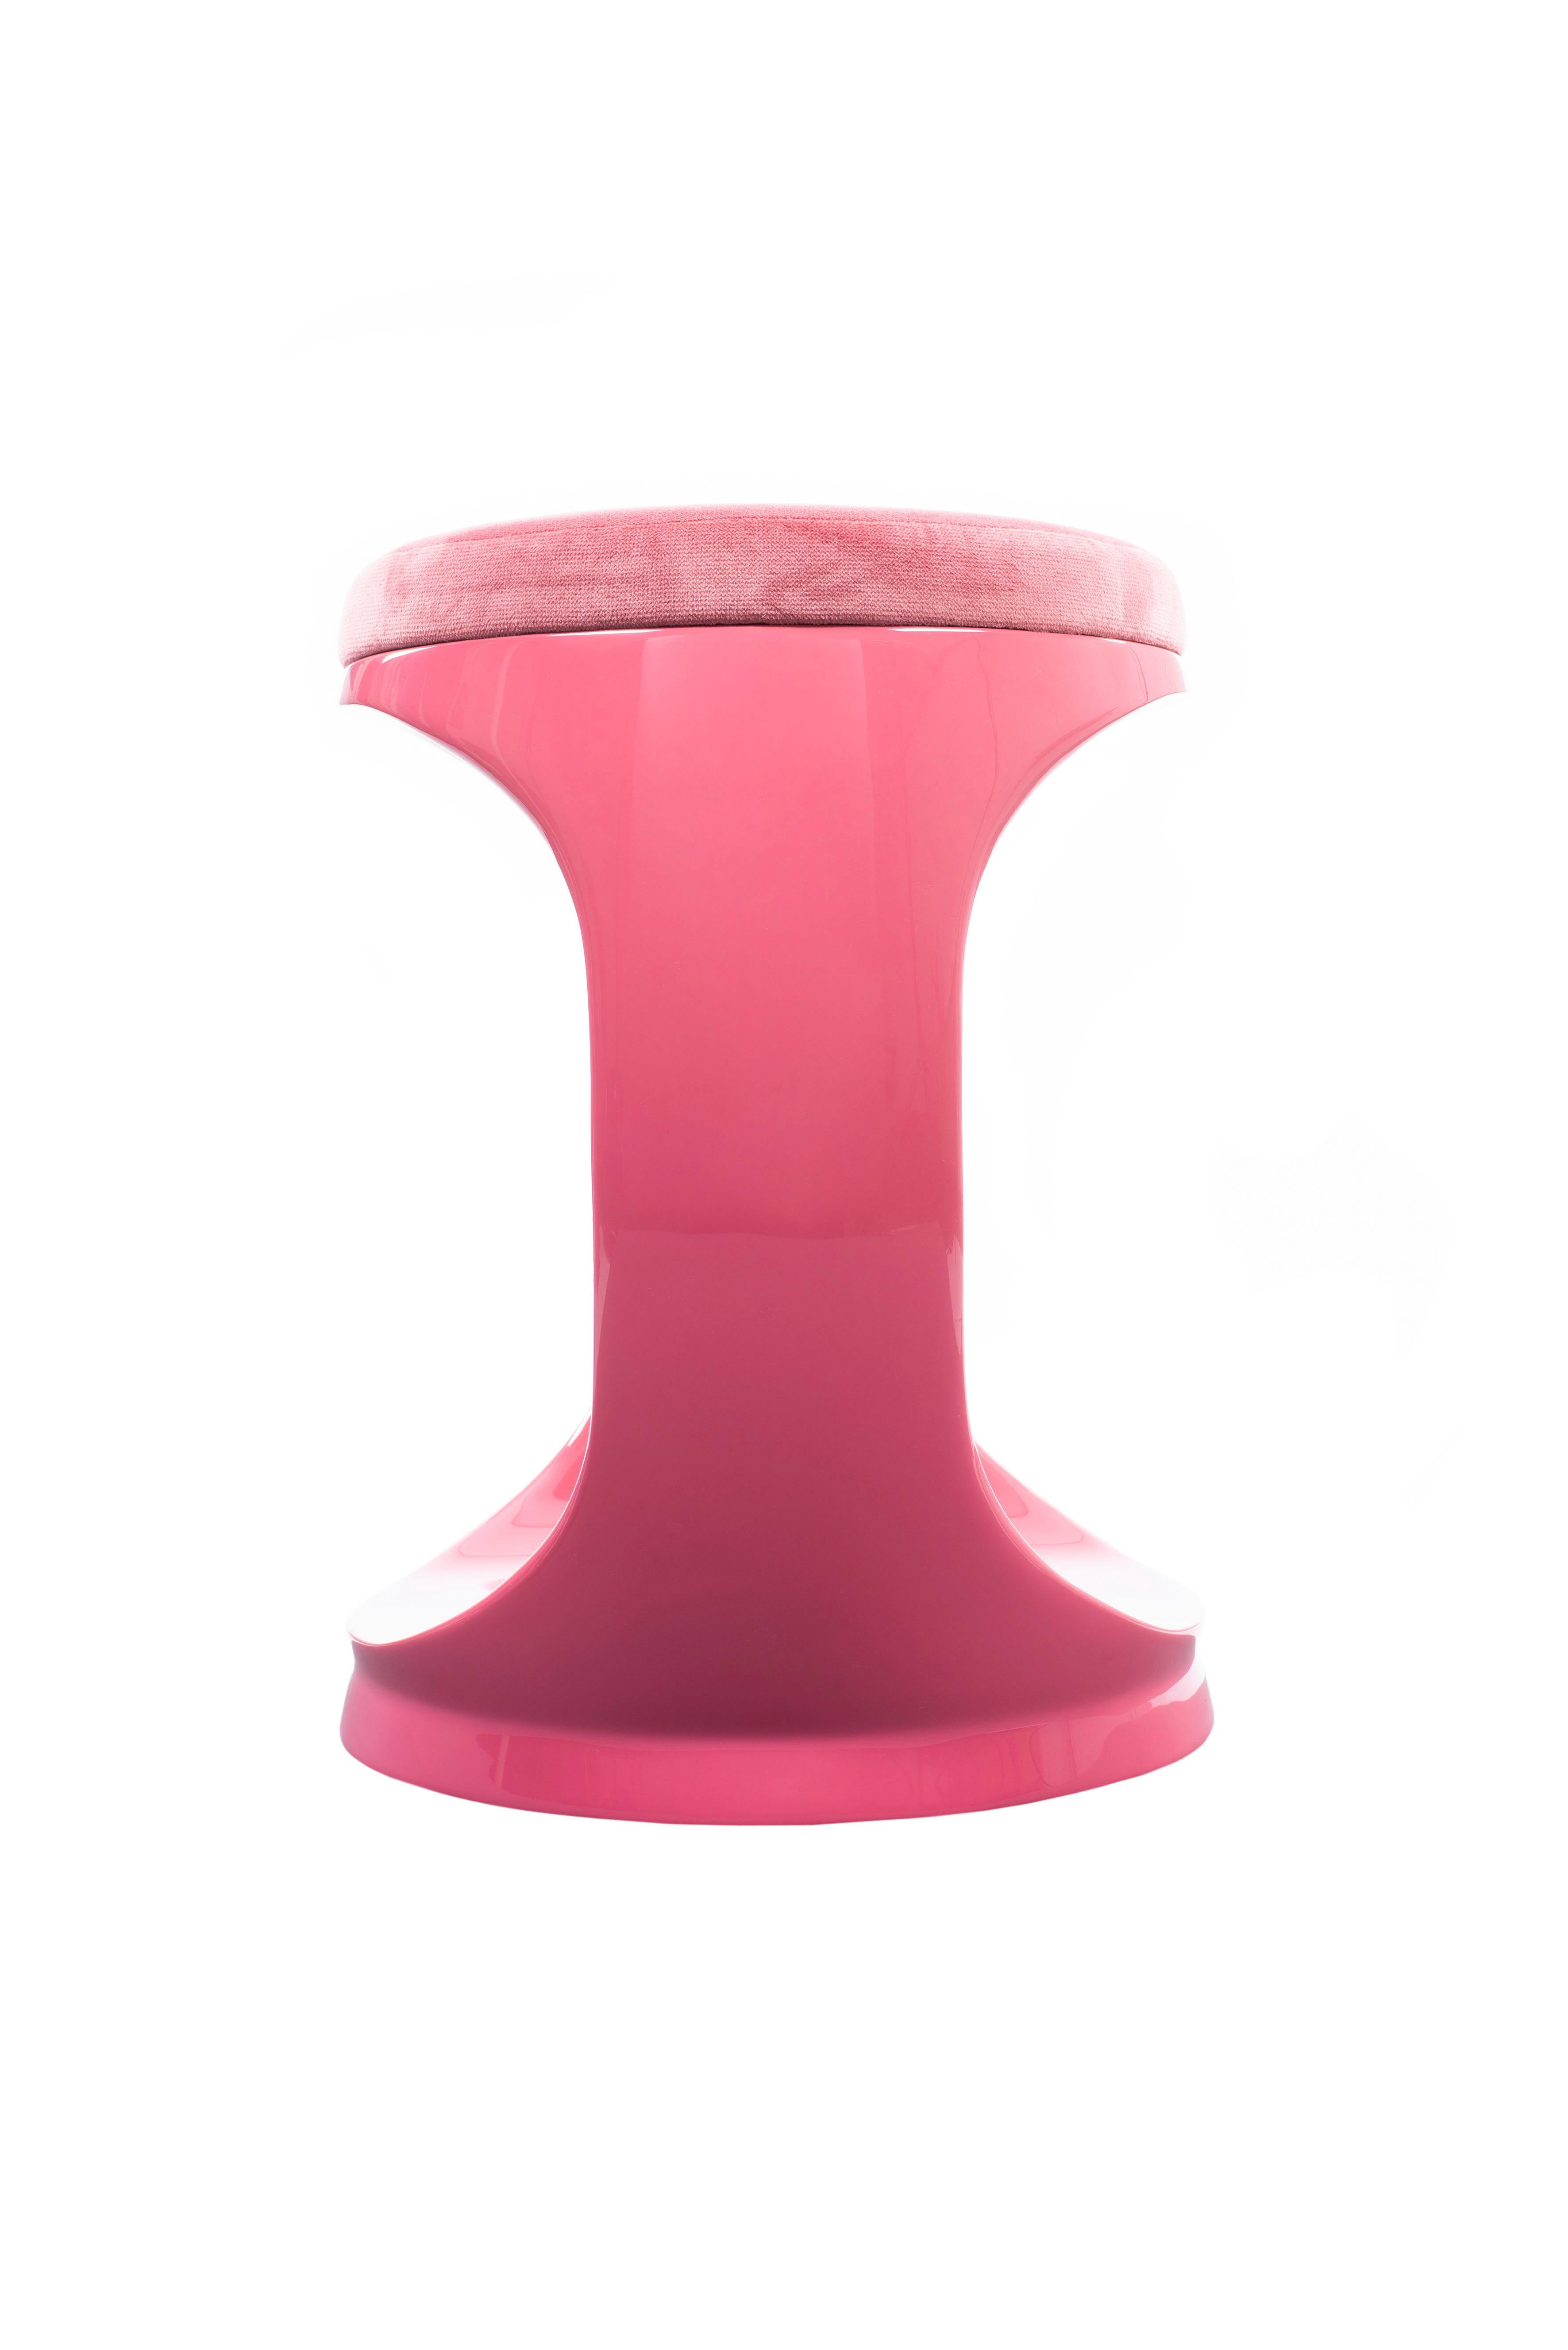 Italian Contemporary Stool by Cyril Rumpler Signet Ring, Pouf Seats Pink For Sale